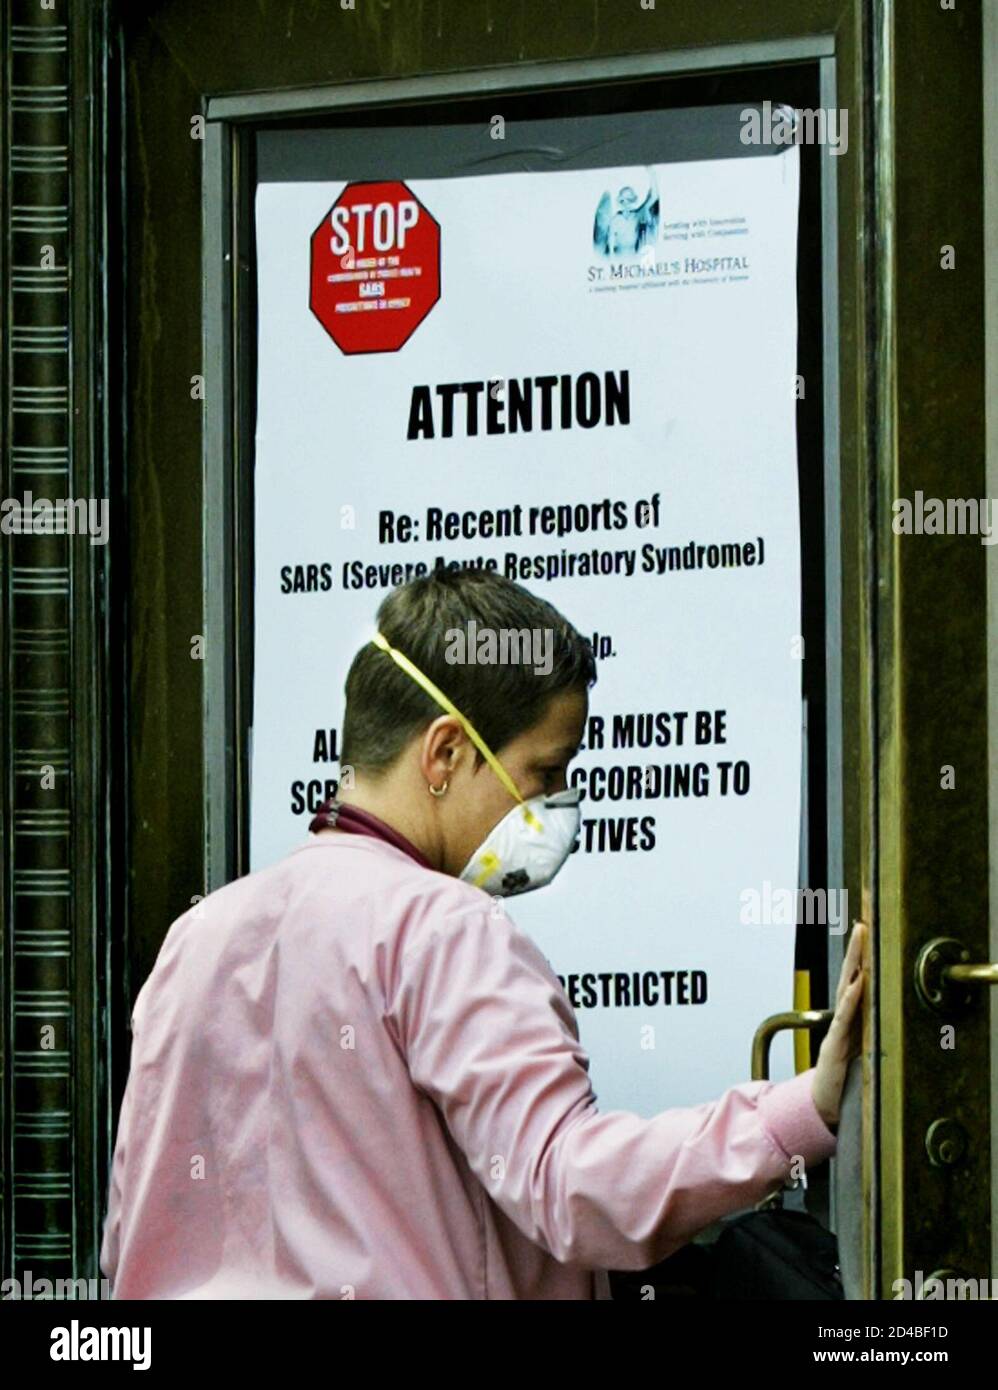 A health care worker, wearing a protective surgical mask to reduce the spread of Severe Acute Respiratory Syndrome (SARS), passes a sign warning of the reoccurrence of the deadly flue-like virus upon entering St. Michael's hospital in Toronto, May 26, 2003. Canadian health officials said on Monday they had detected about 20 more possible cases of SARS and warned of additional deaths as the World Health Organization put Toronto back on its list of SARS-infected areas, just 12 days after it was taken off. REUTERS/ Andrew Wallace  ANW/HB Stock Photo